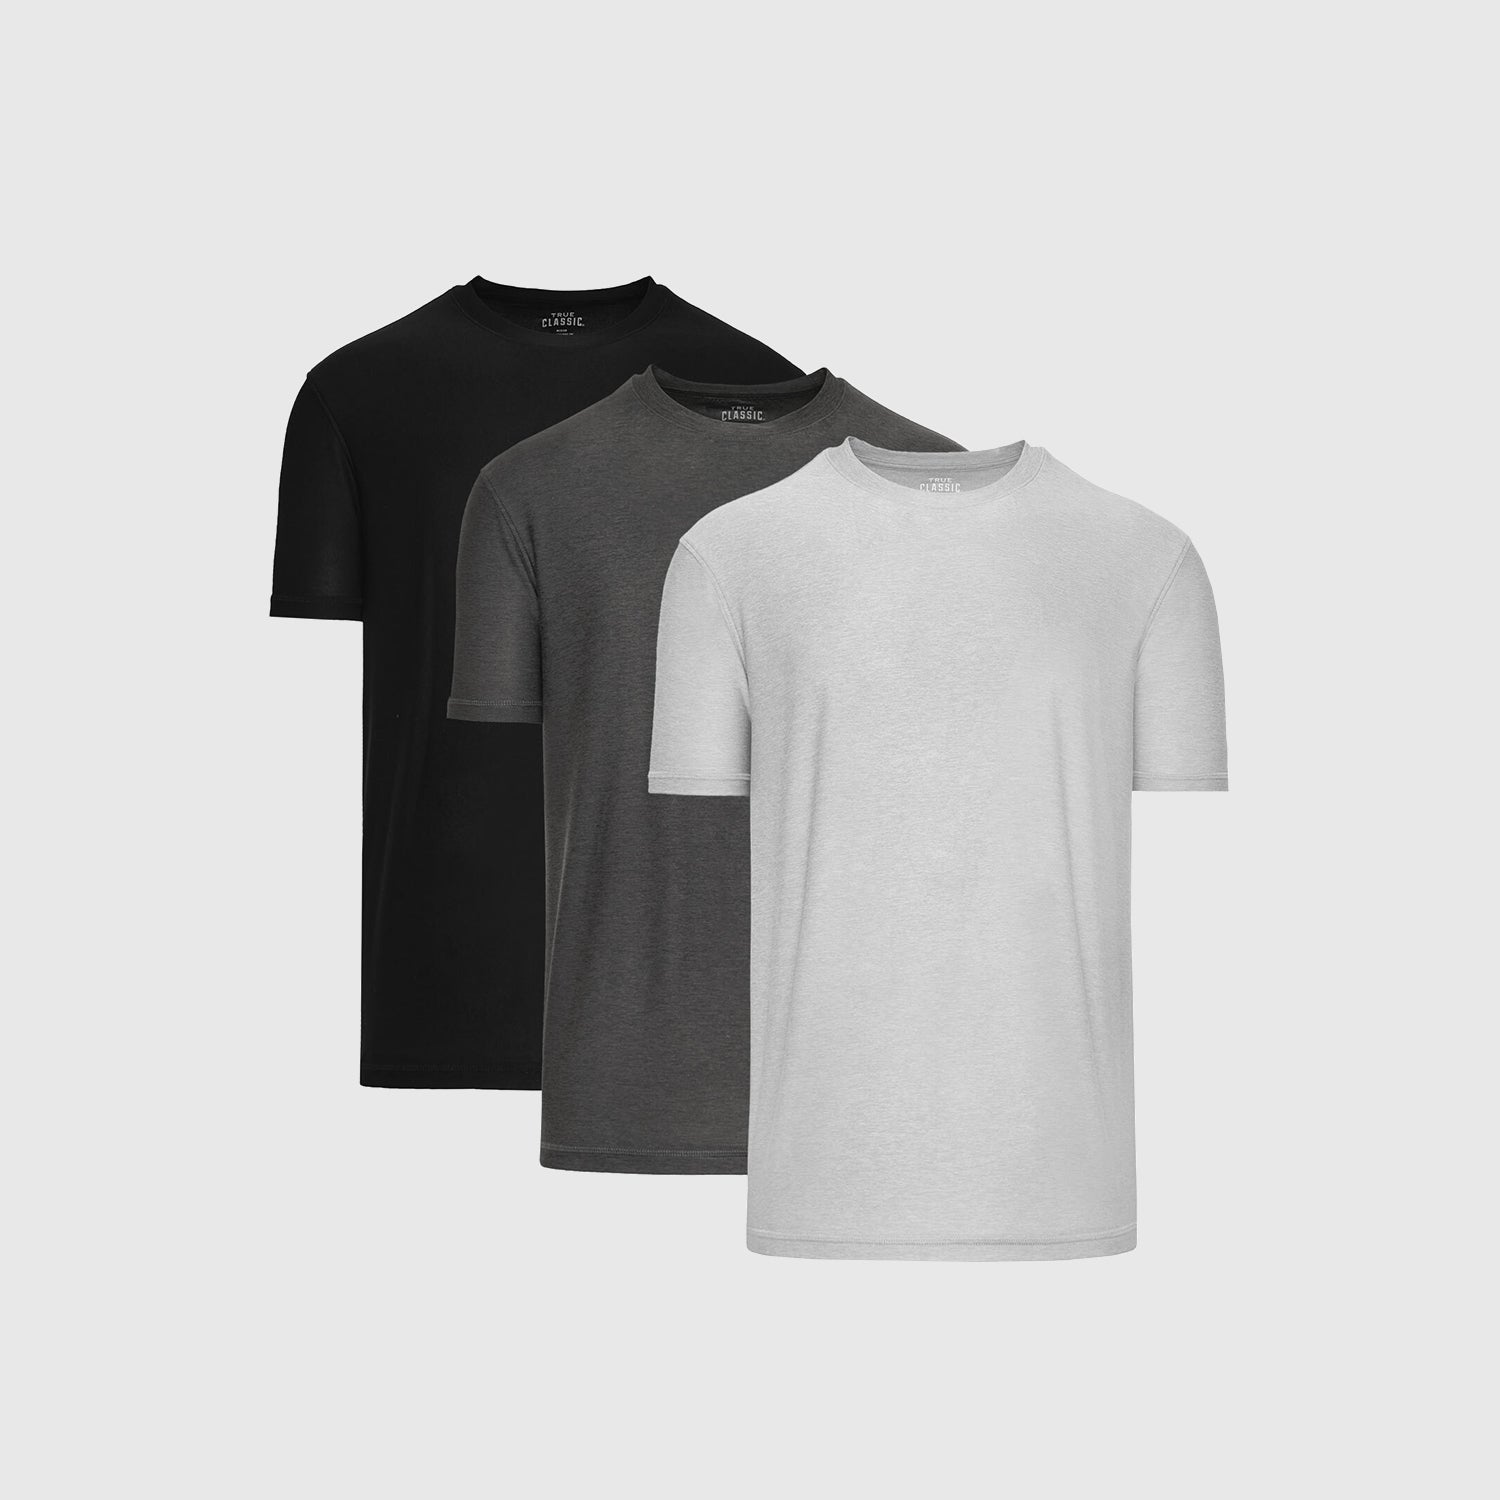 Blank Activewear Pack of 5 Men's T-Shirt, Quick Dry Performance fabric 